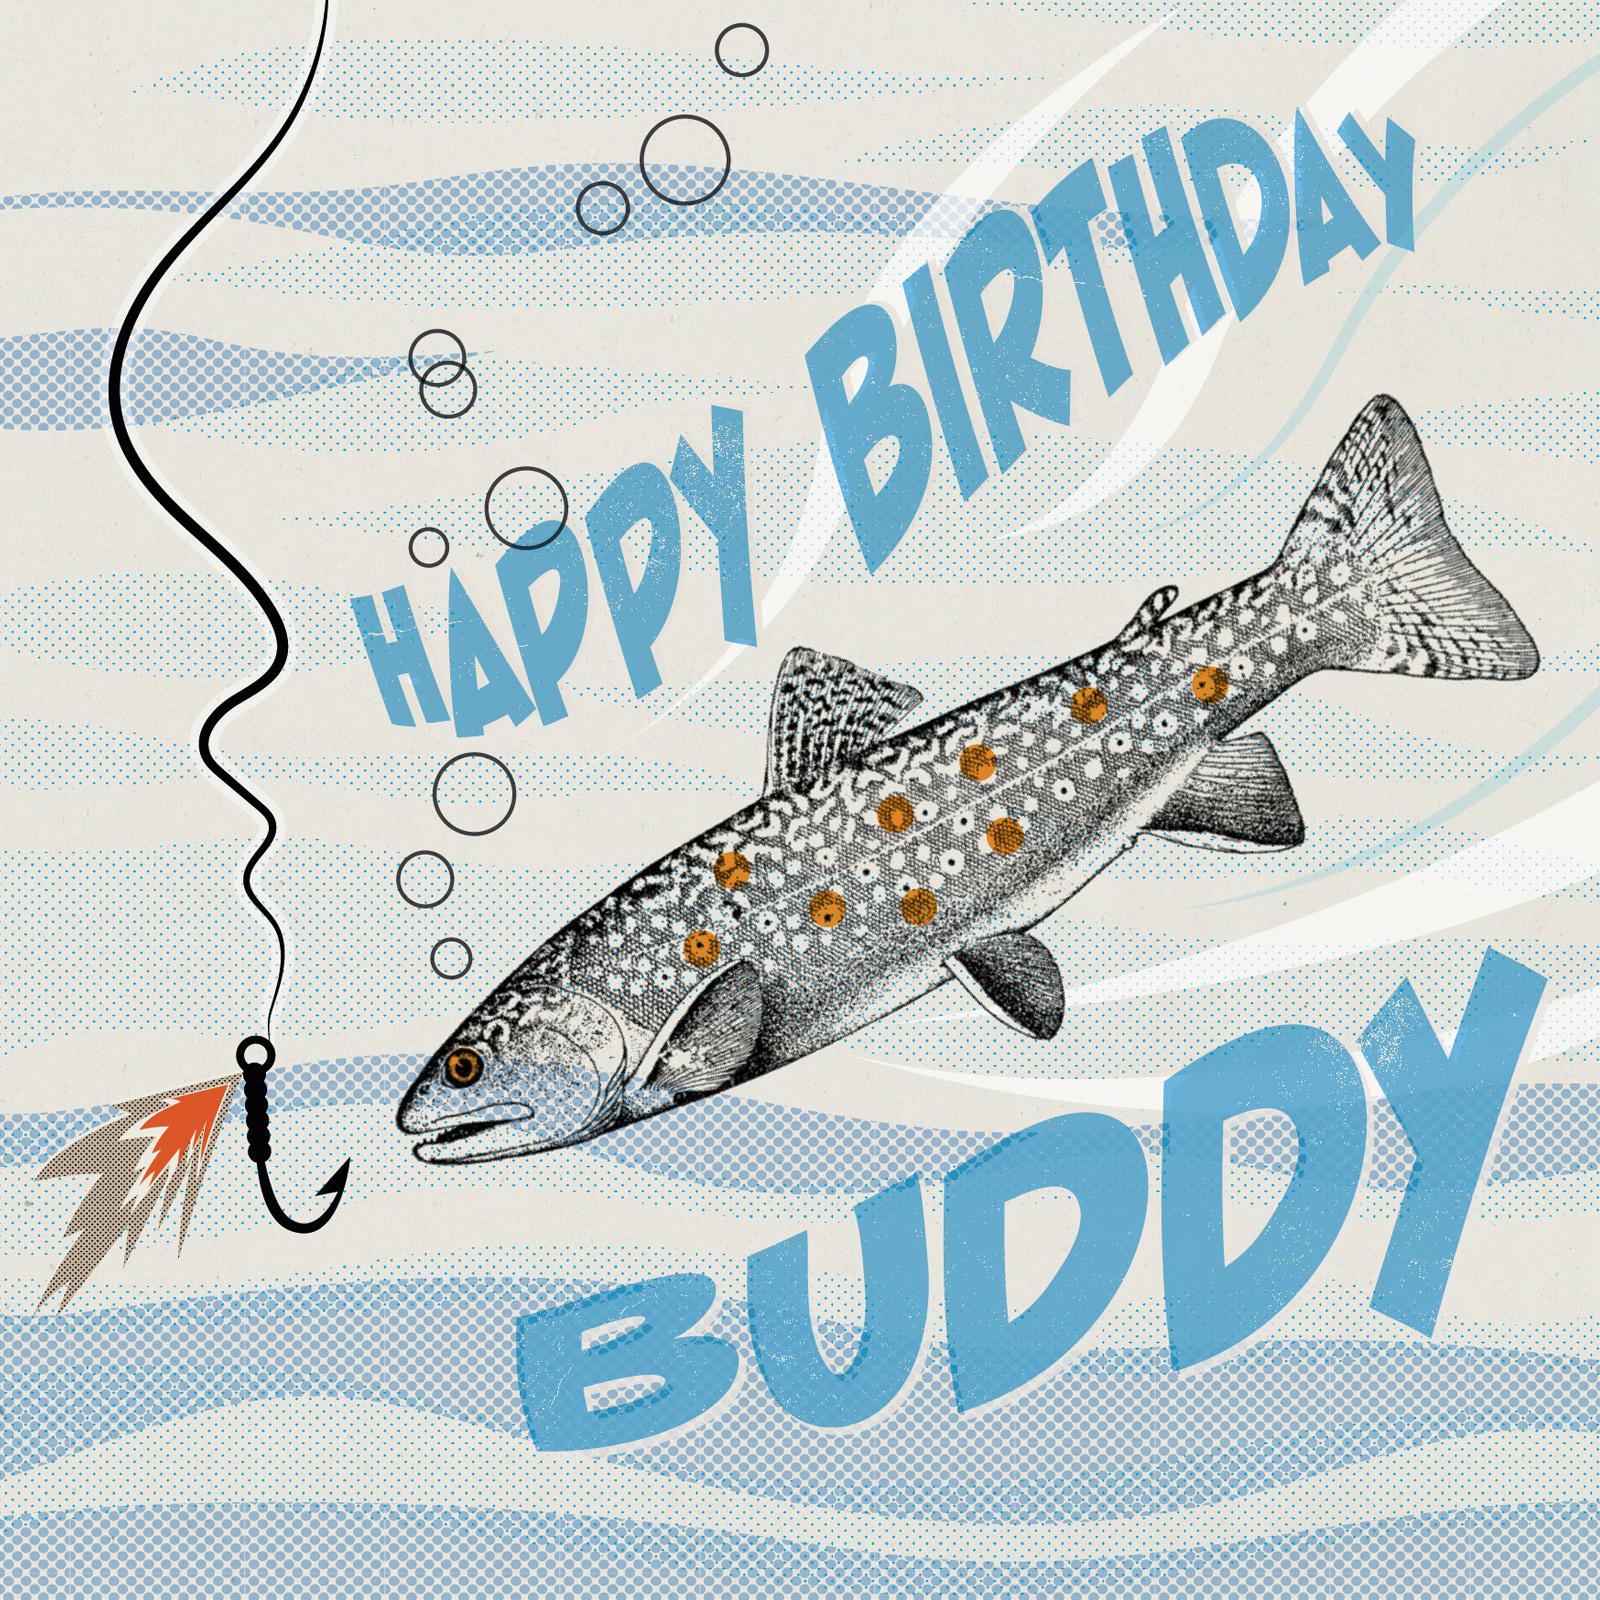 vintage fish illustration with fly hook and abstract 50s-style water and bubbles background in blue tones with text happy birthday buddy